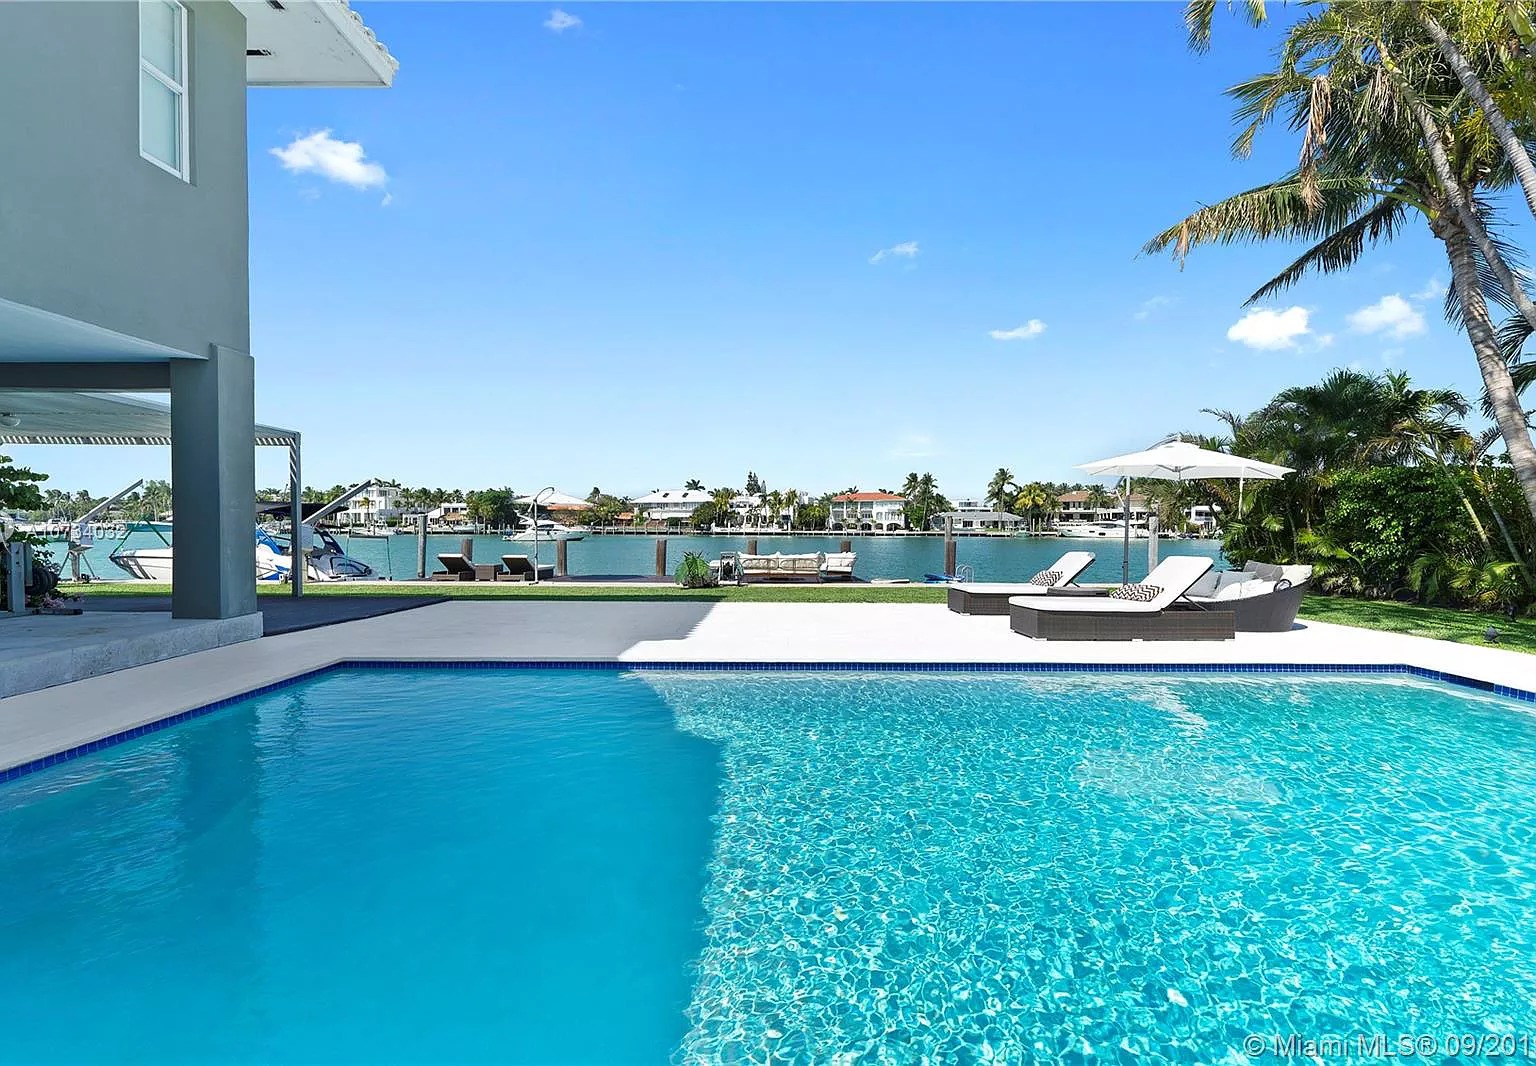 601 N Mashta Dr, Key Biscayne, FL 33149 - $7,350,000 home for sale, house images, photos and pics gallery